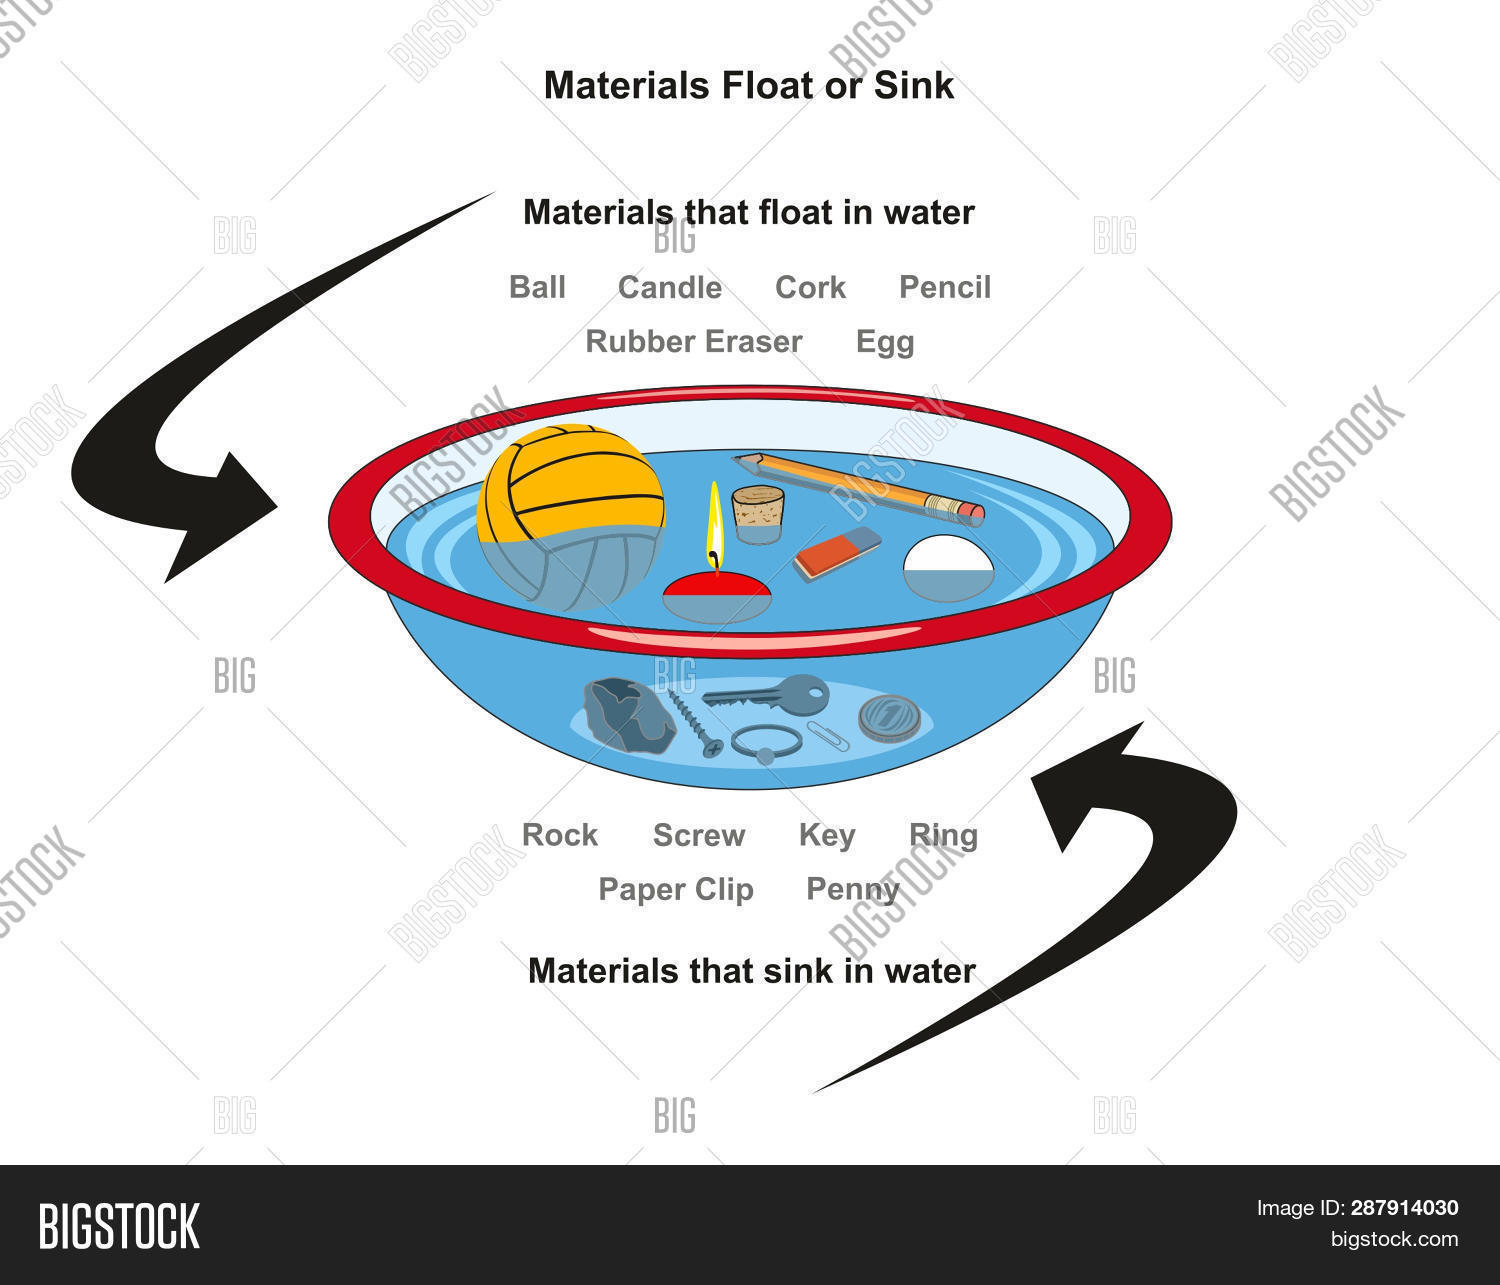 Diagram Of An Egg Materials Float Sink Image Photo Free Trial Bigstock